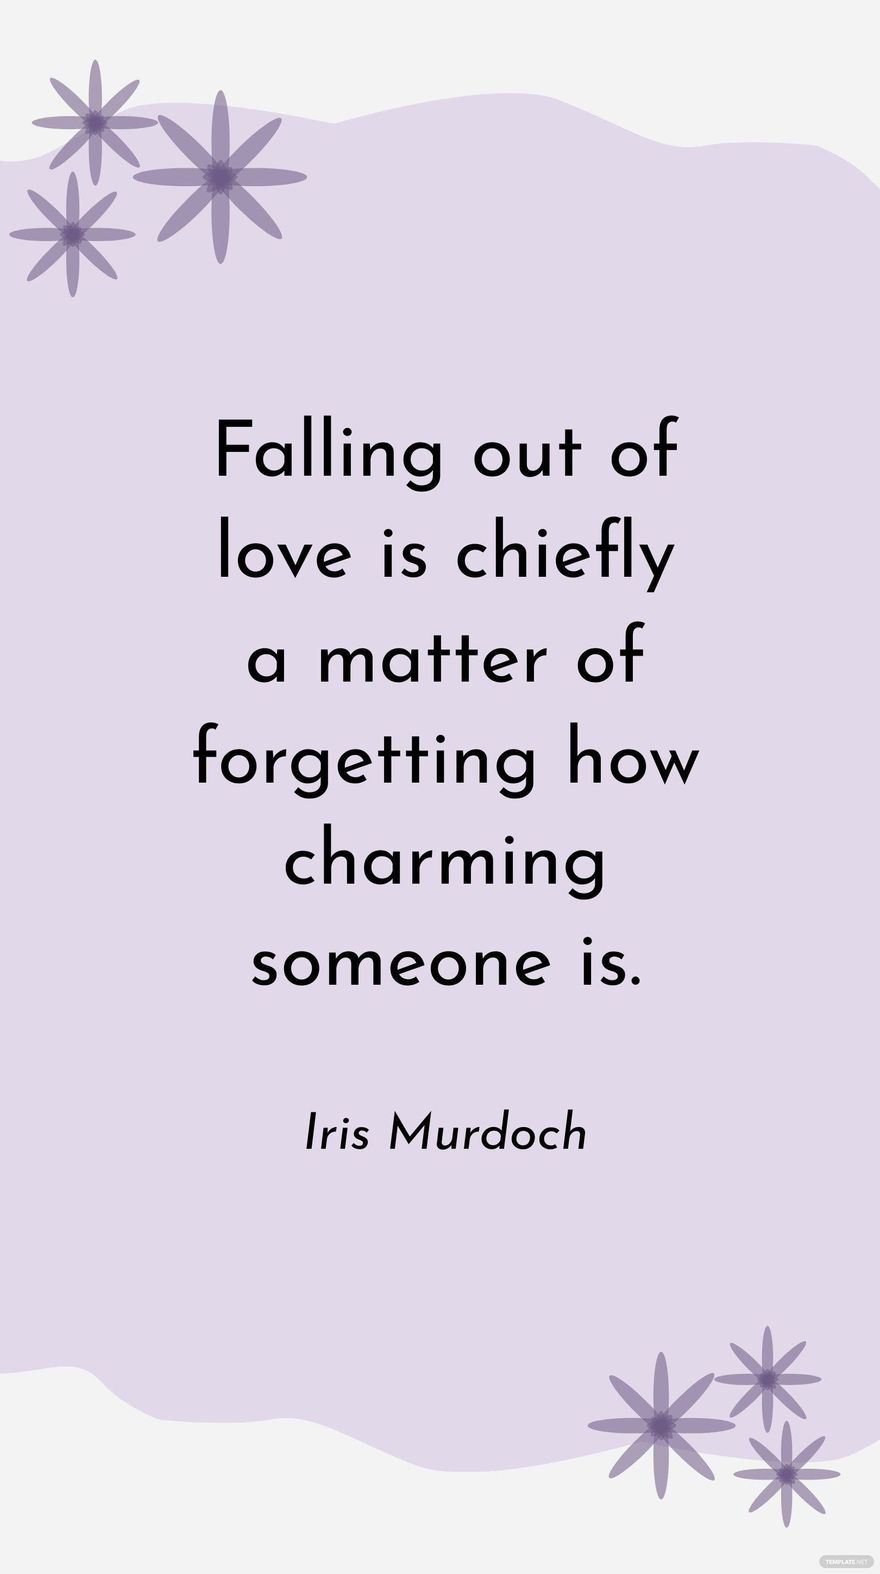 Iris Murdoch - Falling out of love is chiefly a matter of forgetting how charming someone is.